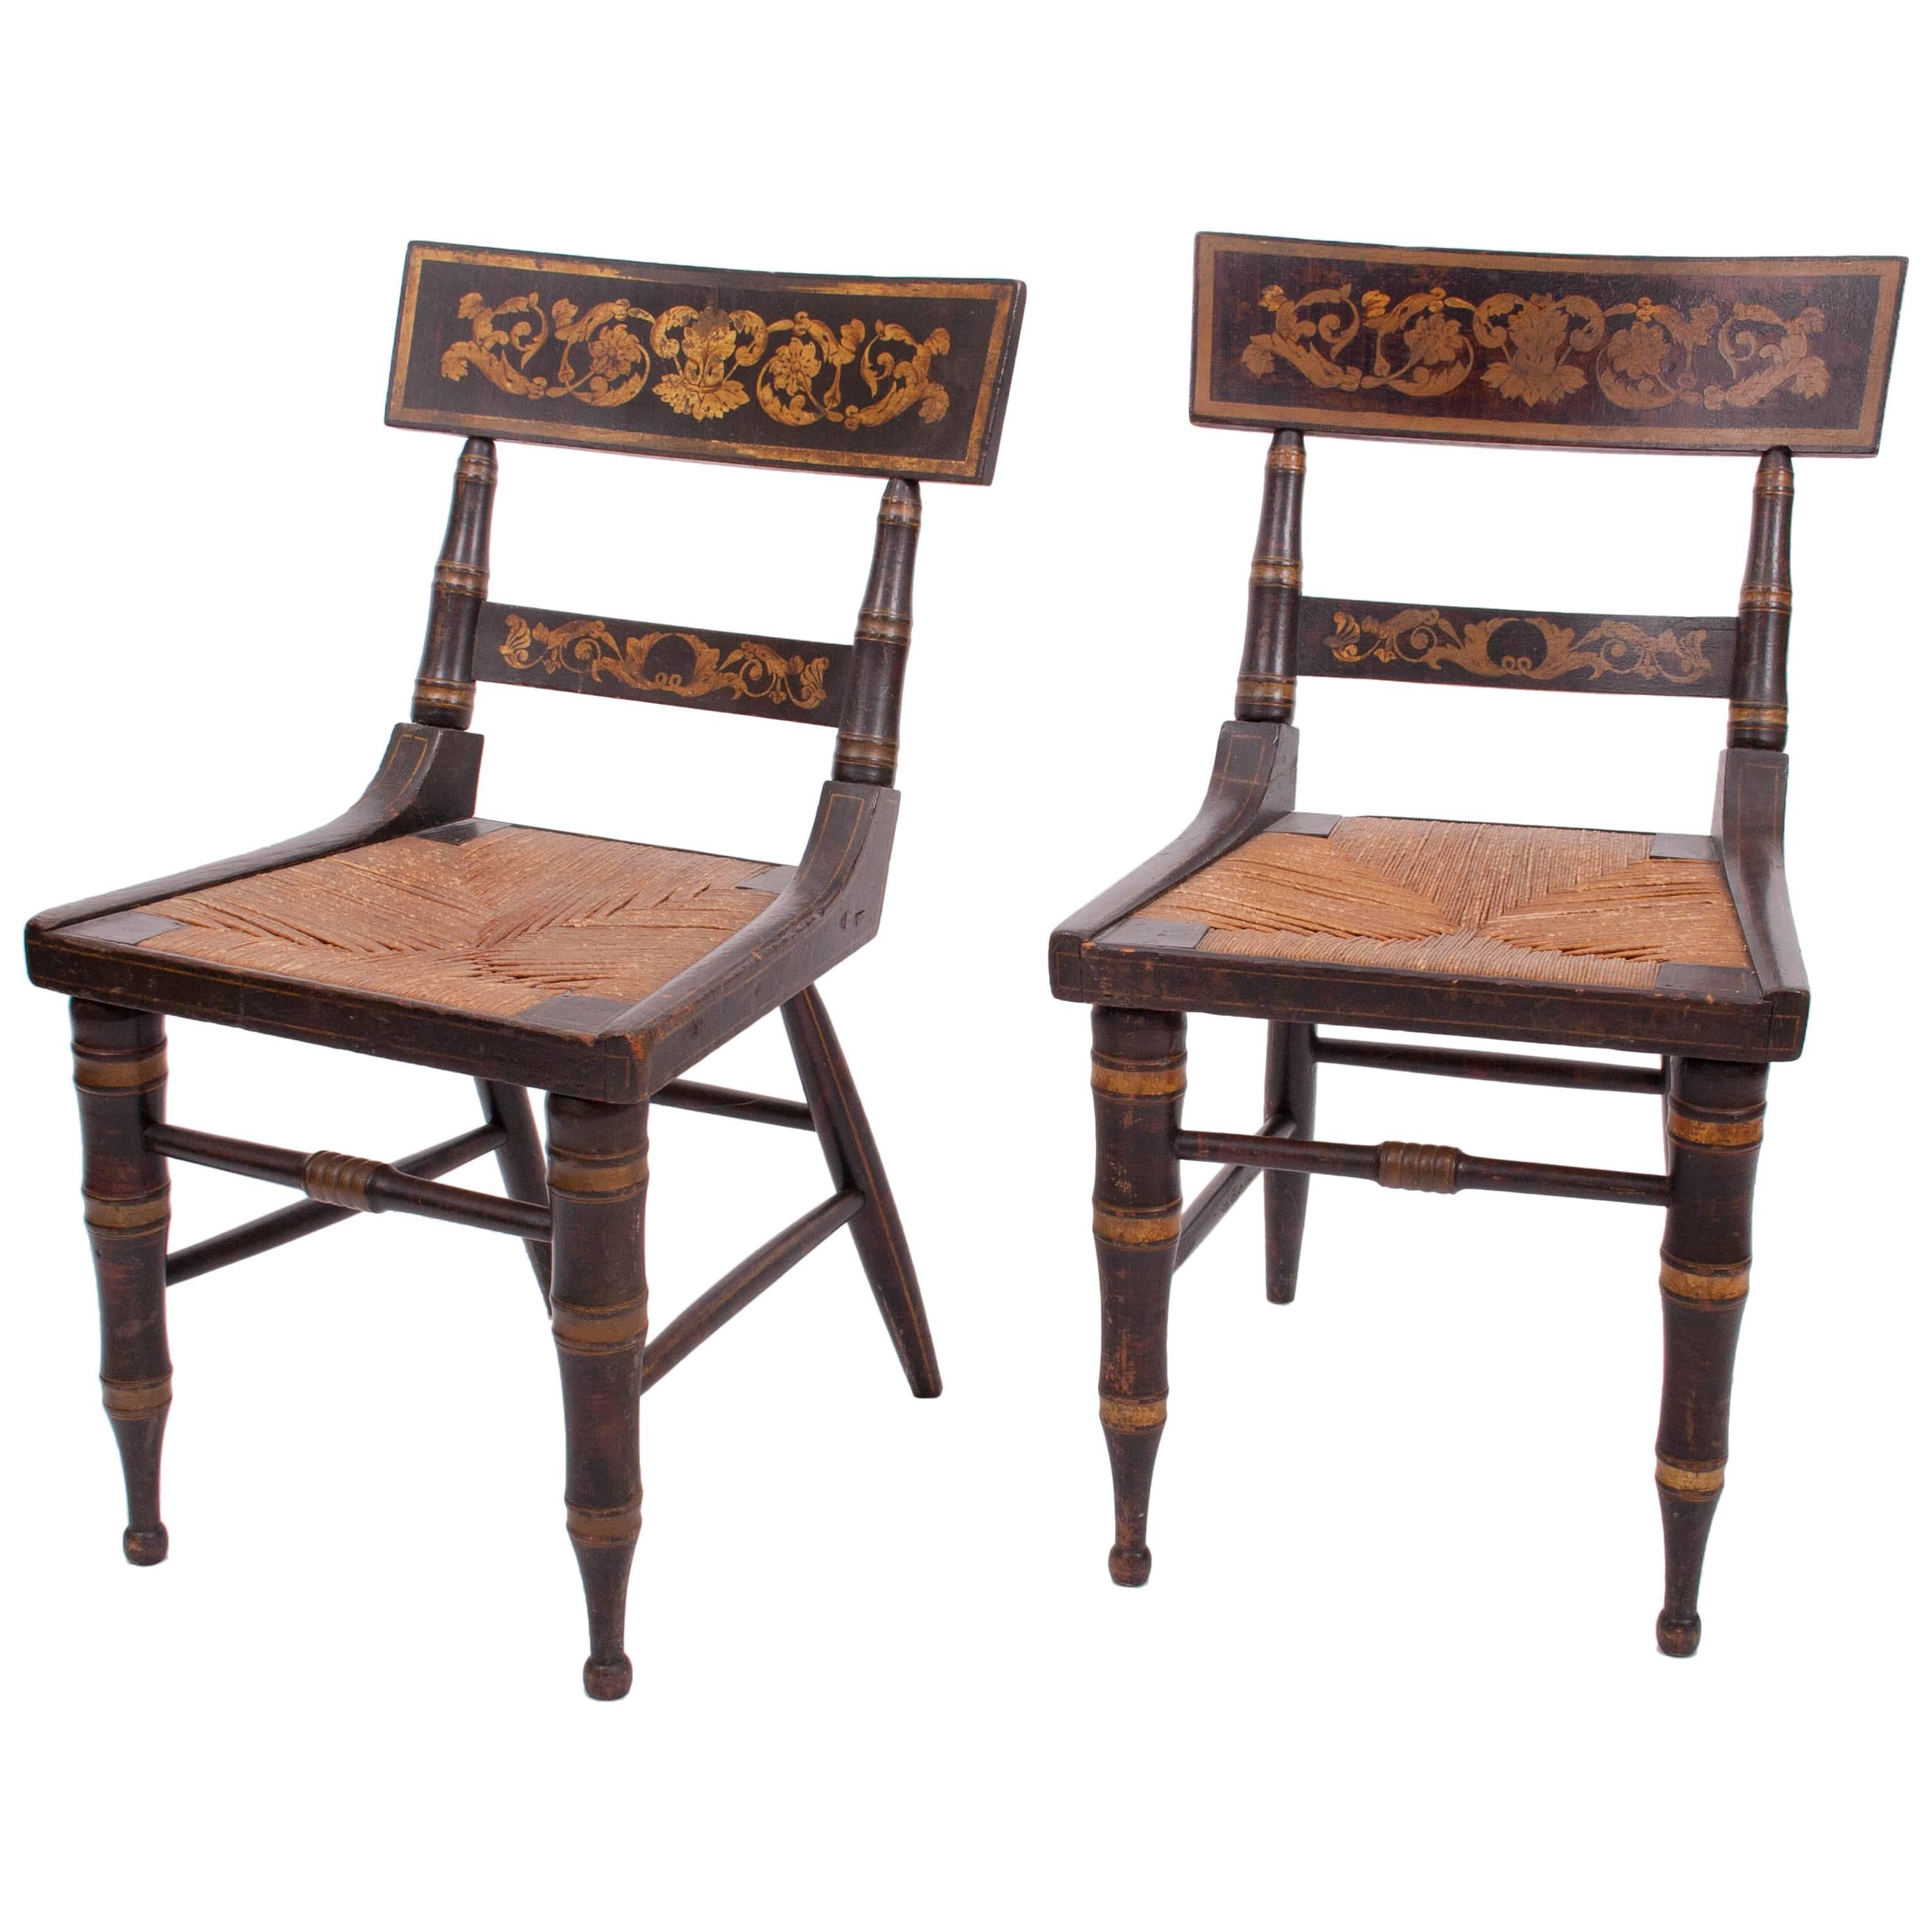 Pair of Baltimore "Fancy" Side Chairs